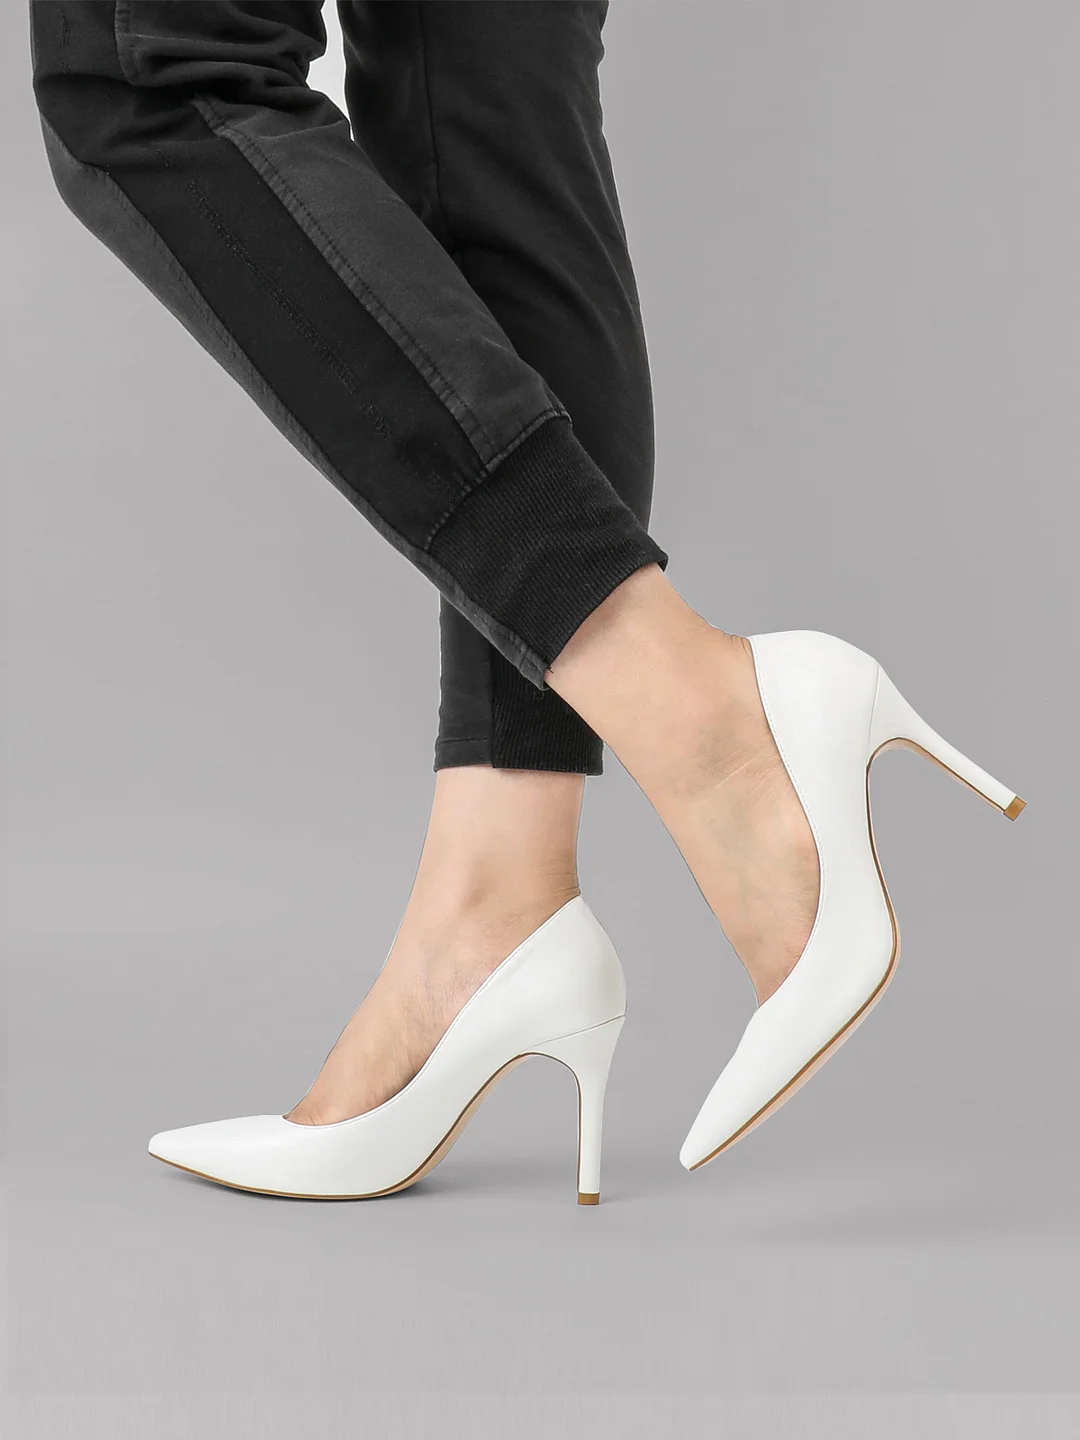 Classic 3.5" Middle Heels Shoes Women Daily  Pumps